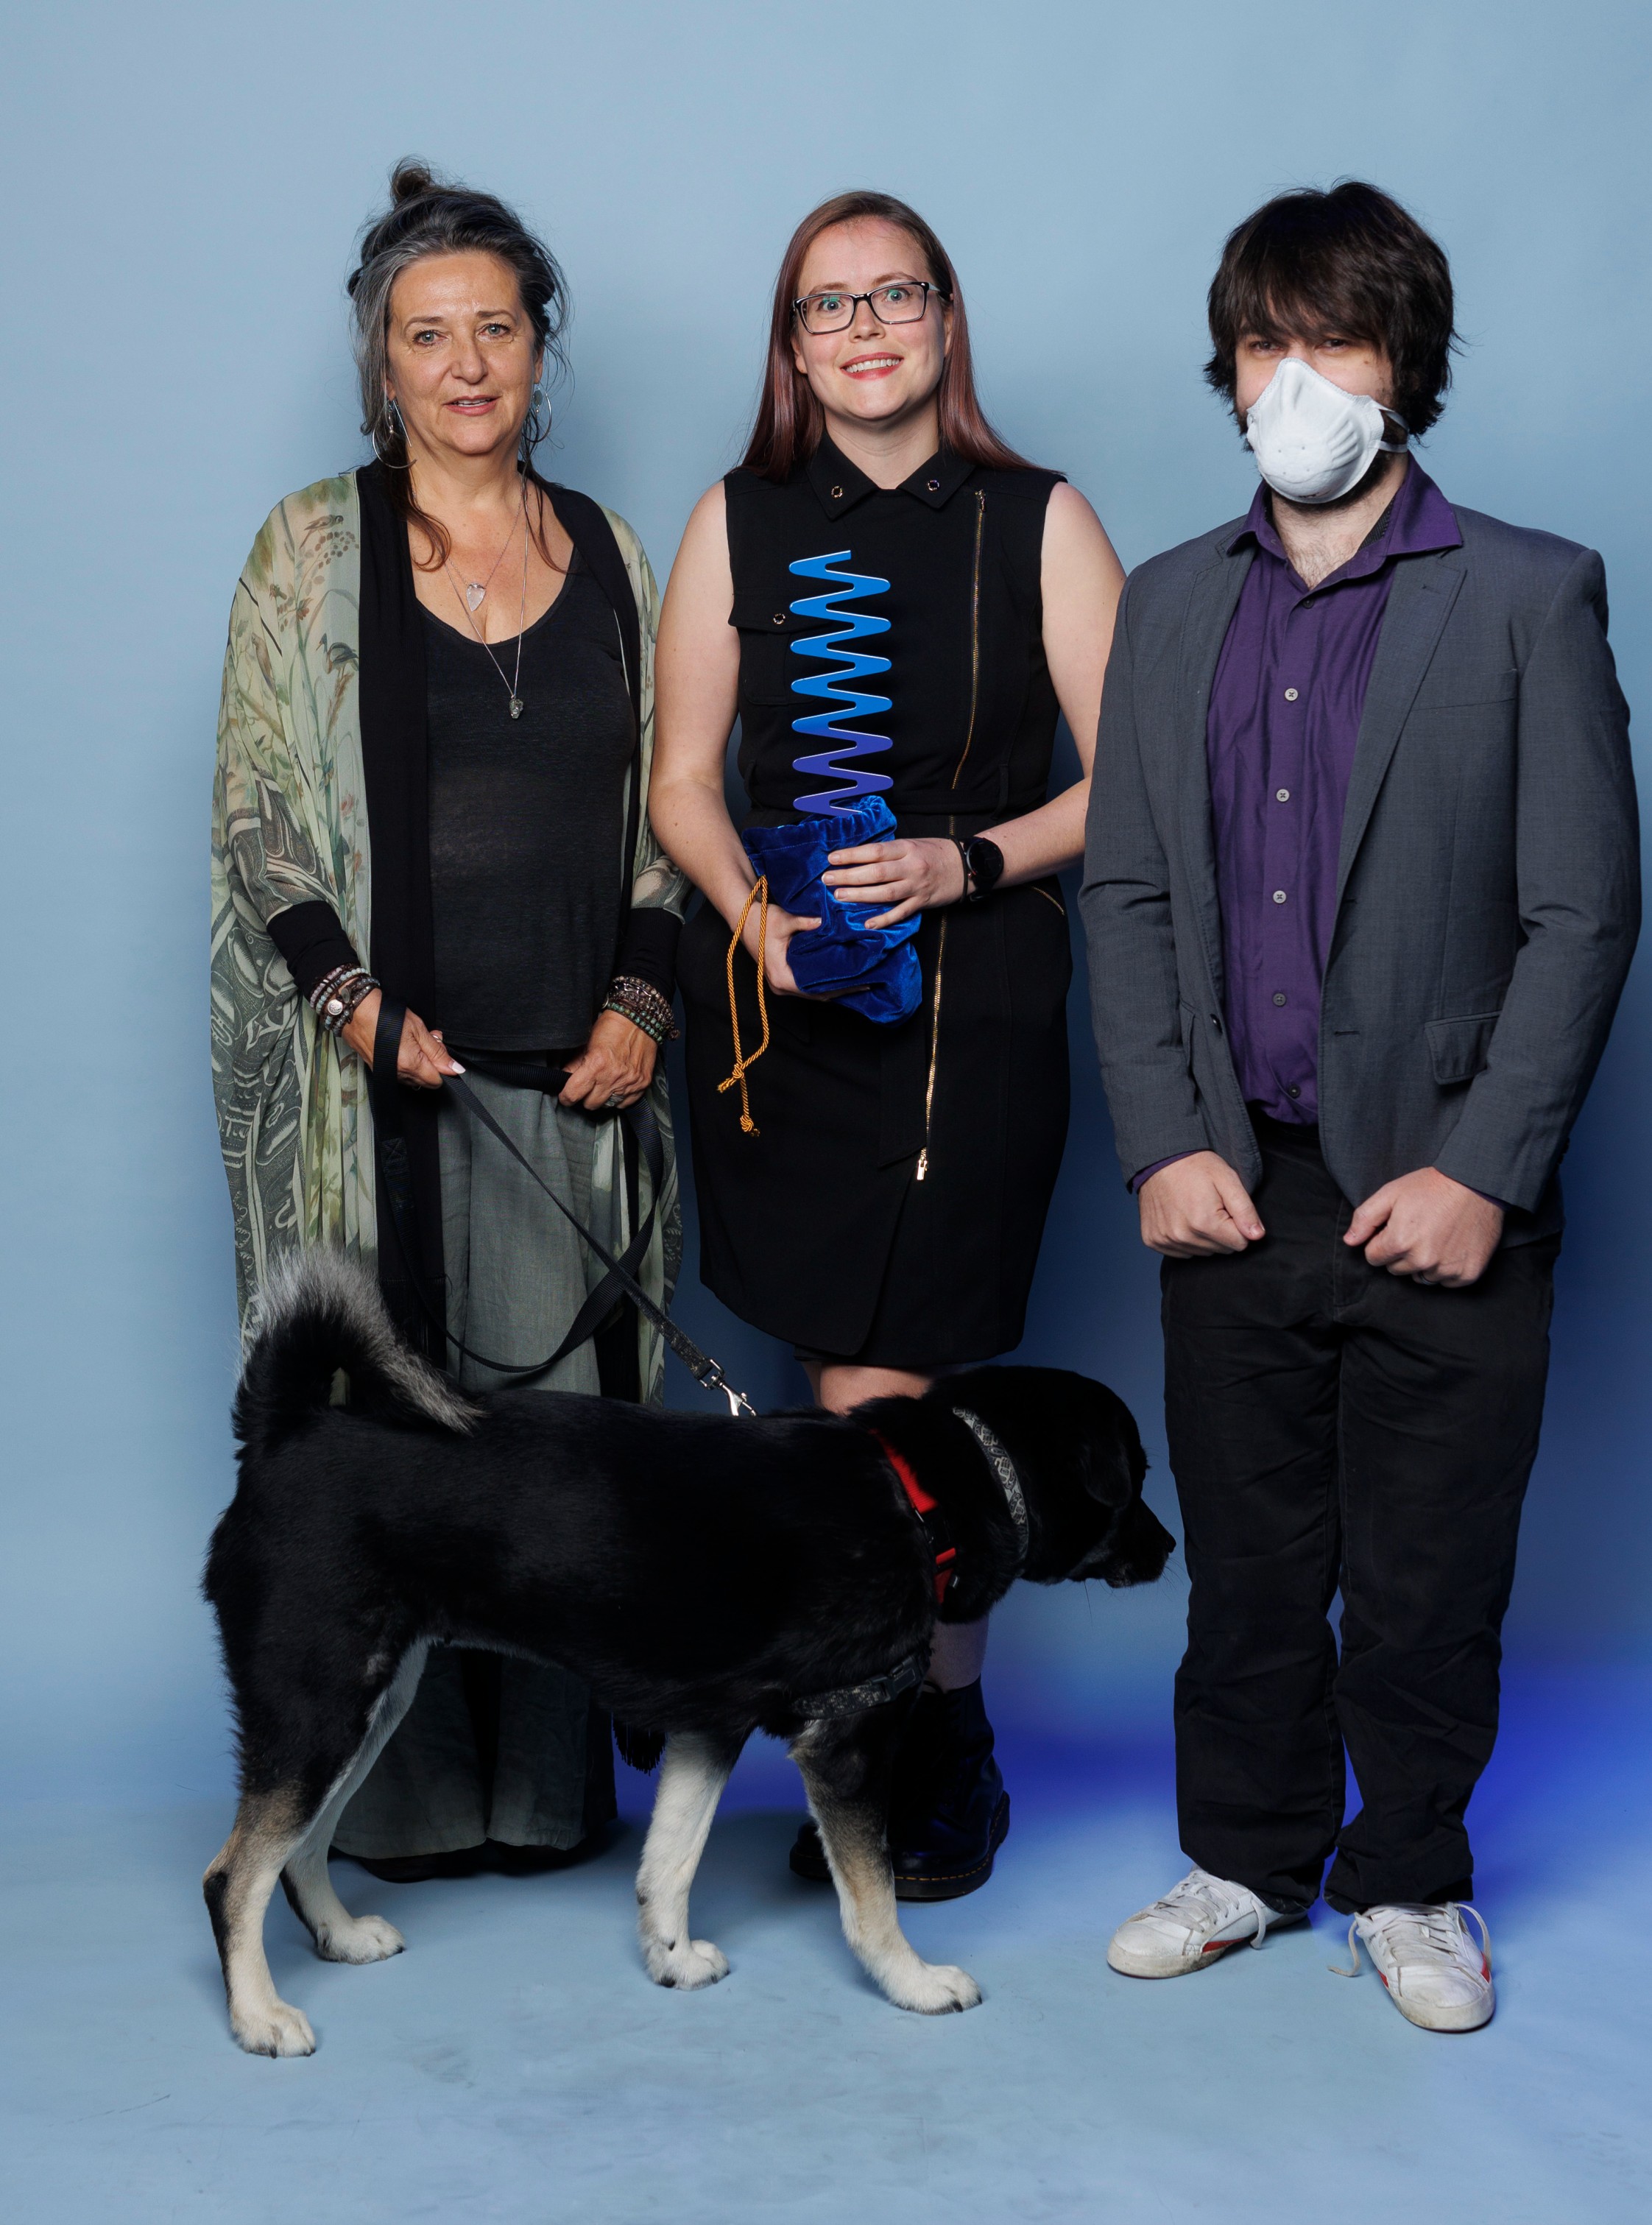 Listen to Dis Team - Photo of three people and a dog. (Left to right description)- The dog is a black, medium-sized service dog with white paws. He is wearing a harness with a red and black collar held by an older woman with gray and black hair pinned up. She is wearing a a balck blouse, grey pants, and grean and grey floral minono. Next to her is a young woman with red hair and balck rimmed glasses in a black dress. She is holding an light blue and blue Ombre wavelength award in a velvet blue pouch gathered at the base of the award. Next to her a young man with medium length hair. He is wearing a mask, a purple shirt, grey jacket, black pants and white sneakers.